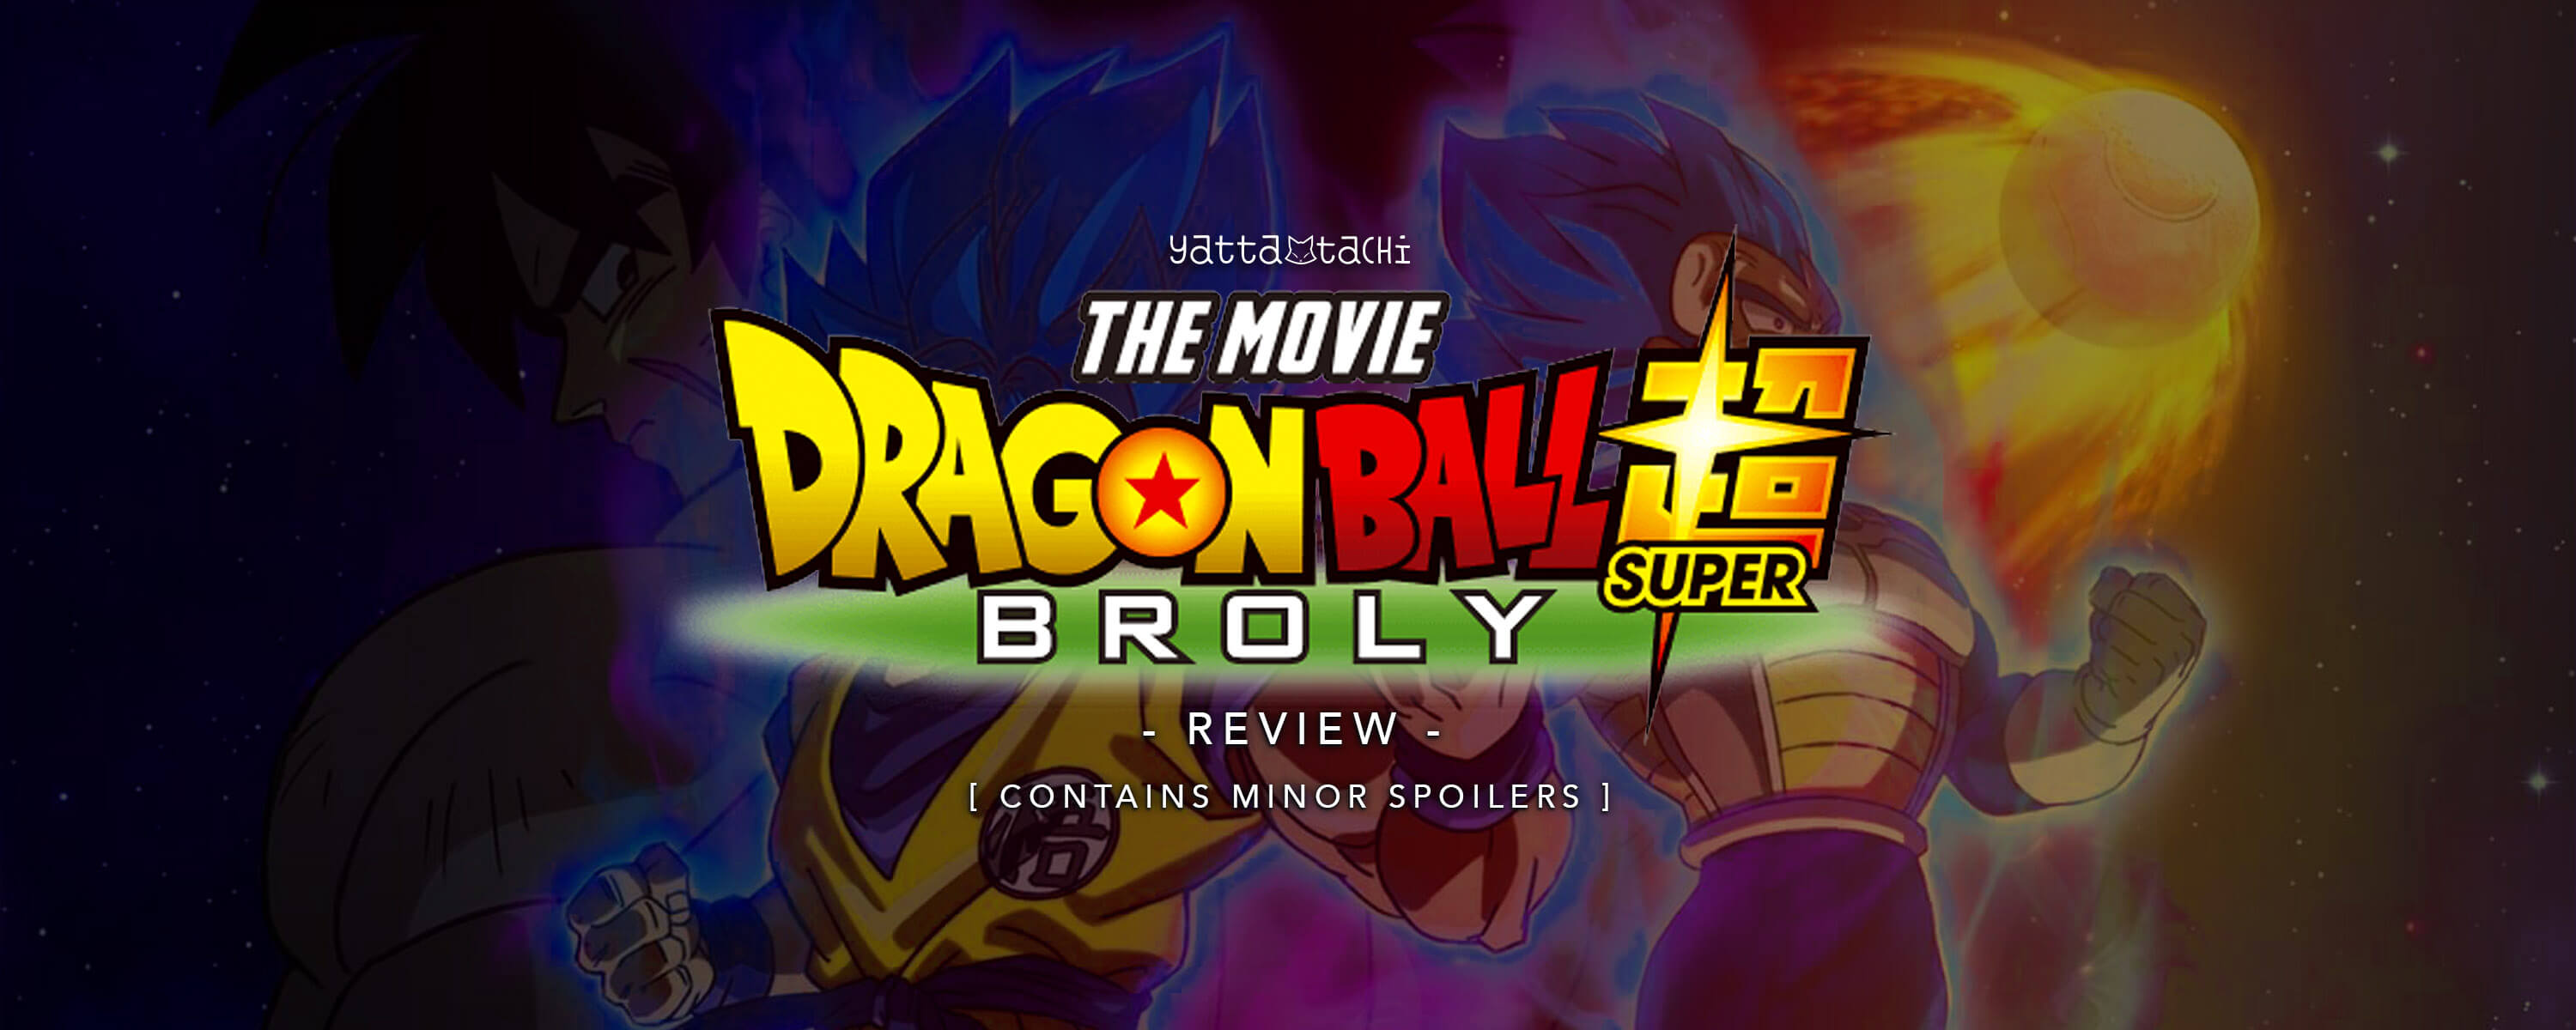 Dragon Ball Super: Broly (2019) - Official Trailer #3 (English Dubbed) 